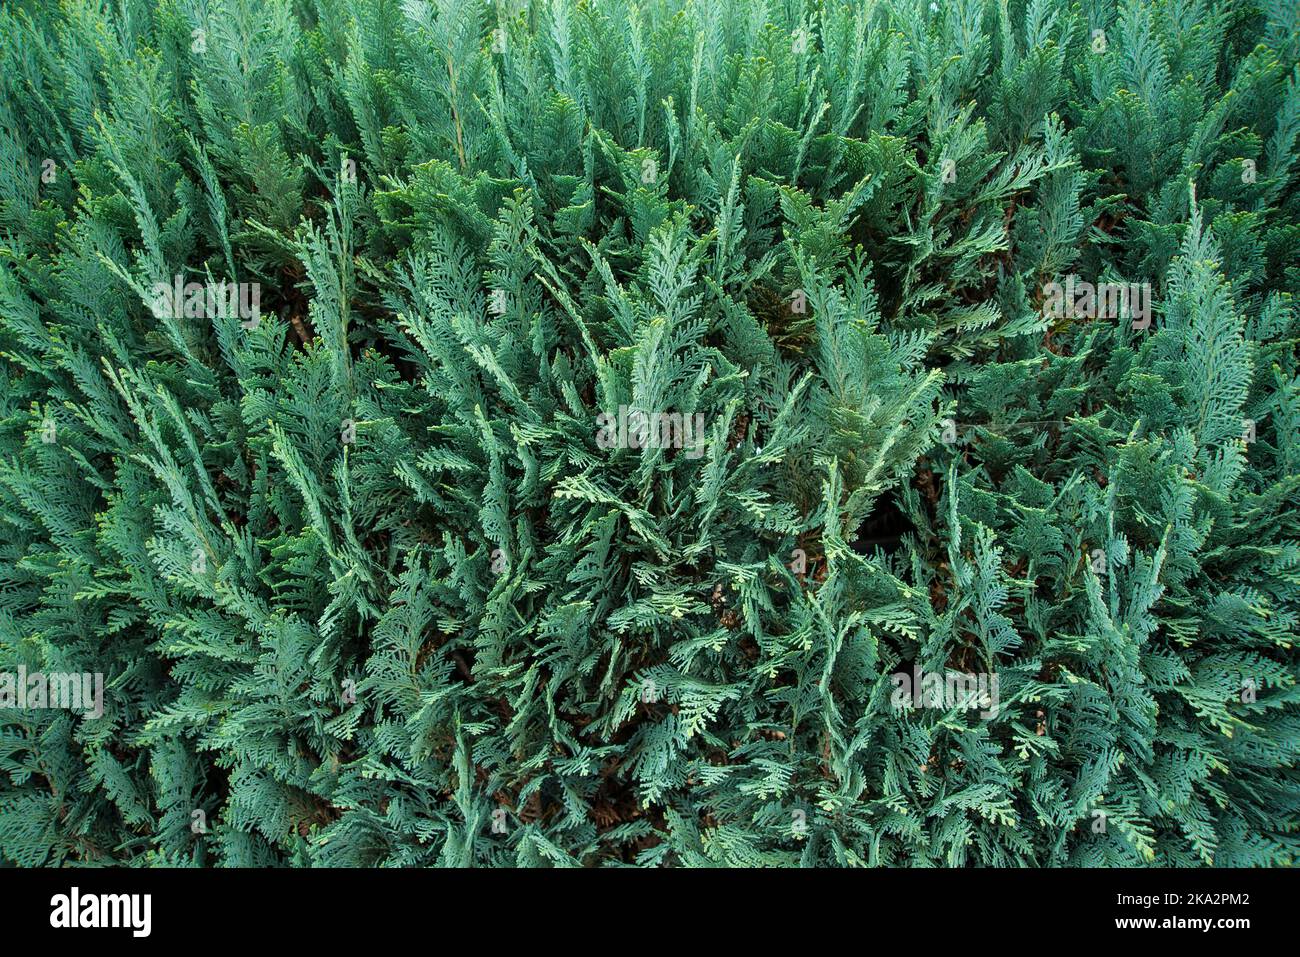 Thuja hedge in a full frame view Stock Photo